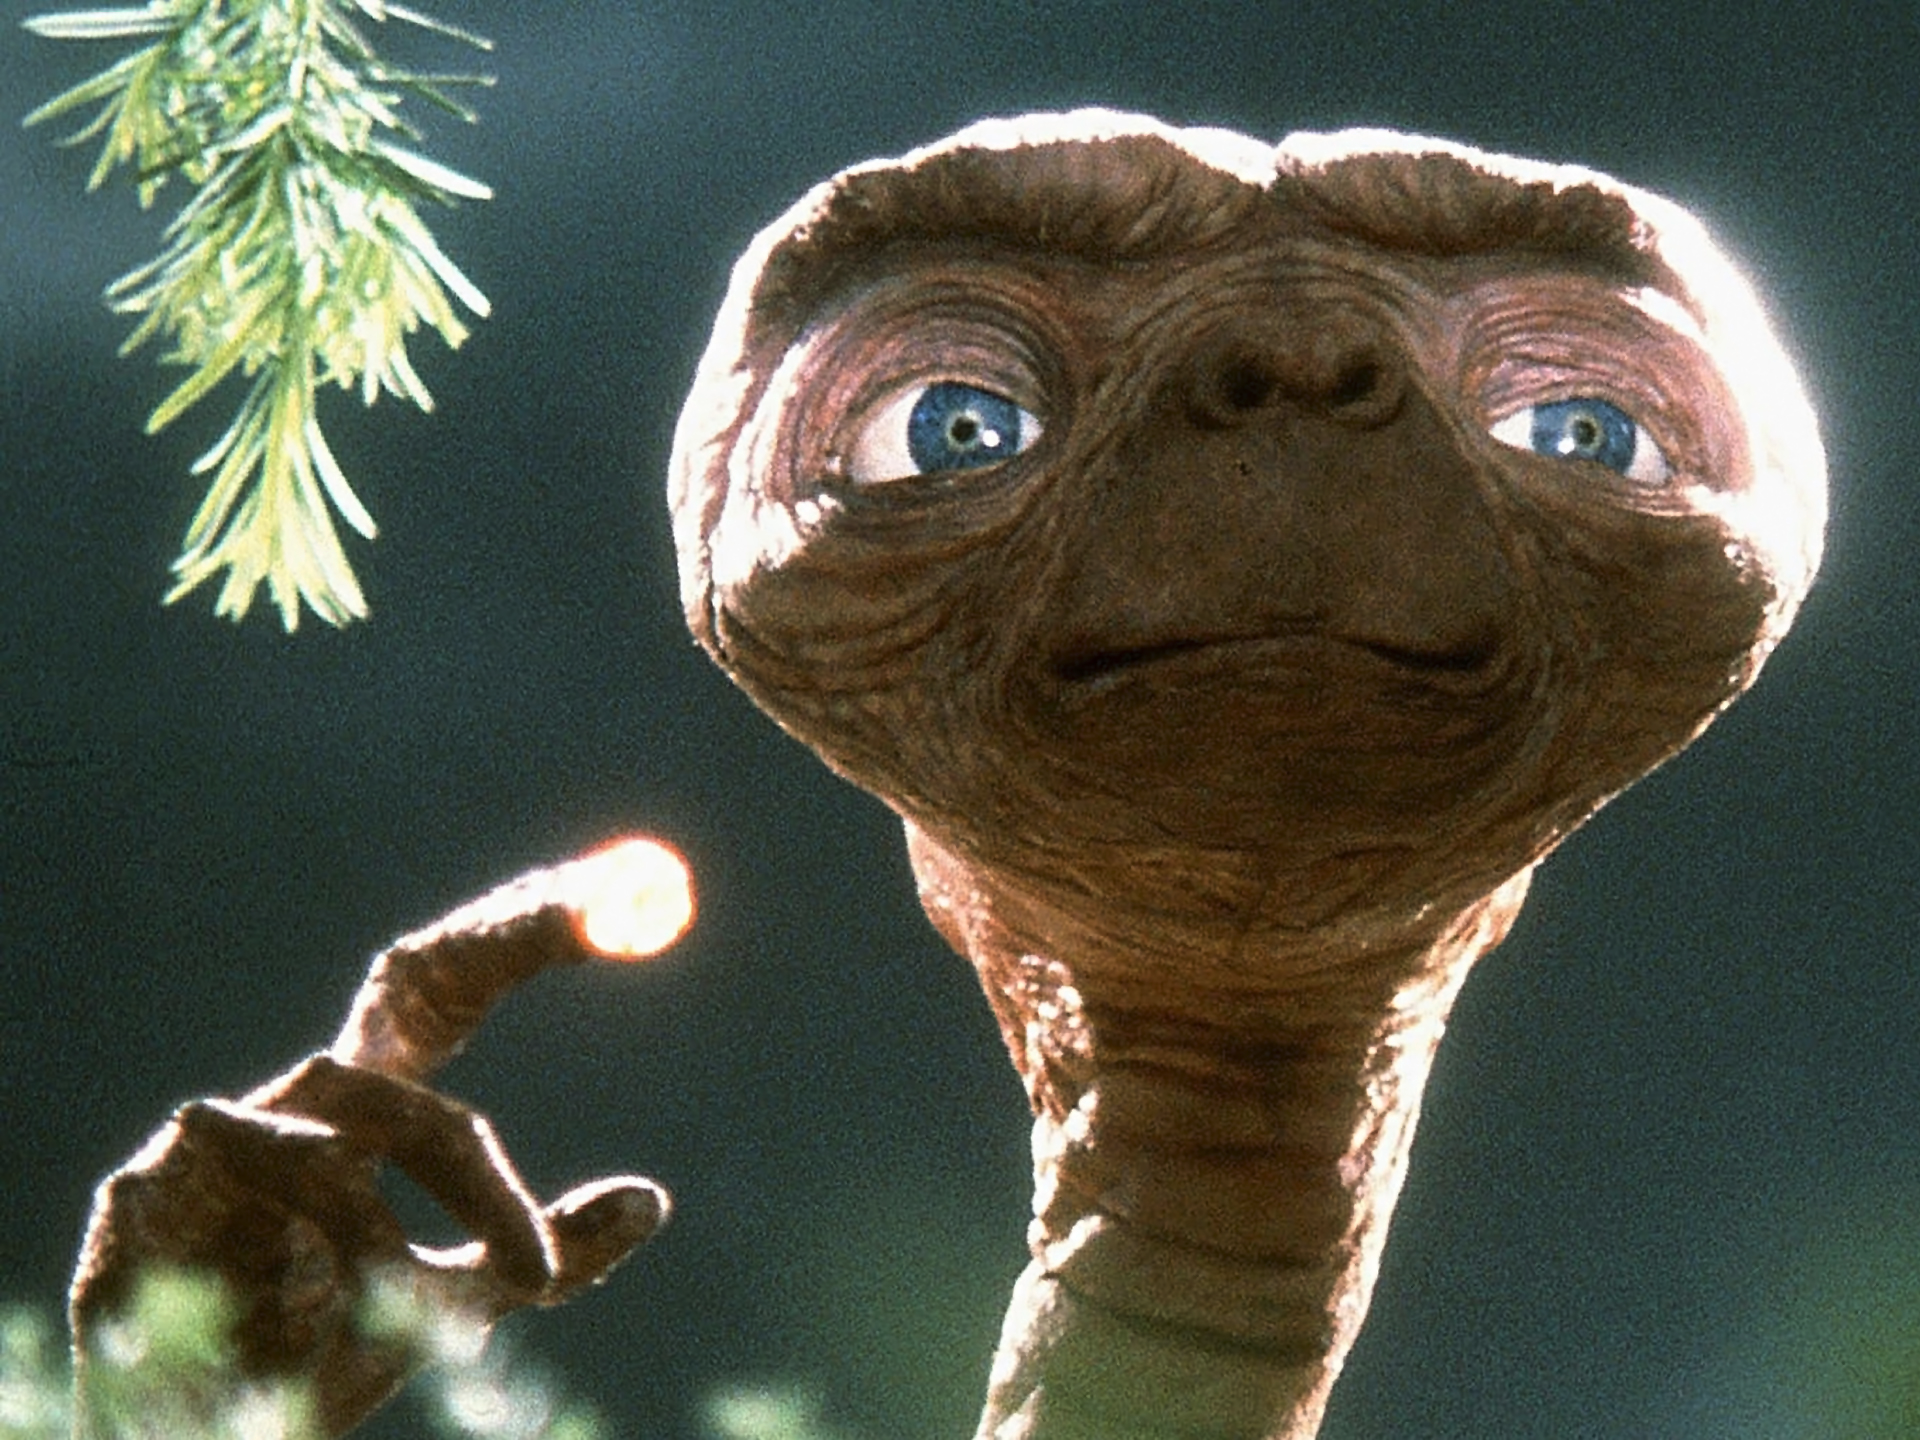 The extra years are. Инопланетянин 1982. Инопланетянин e.t. the Extra-Terrestrial 1982.